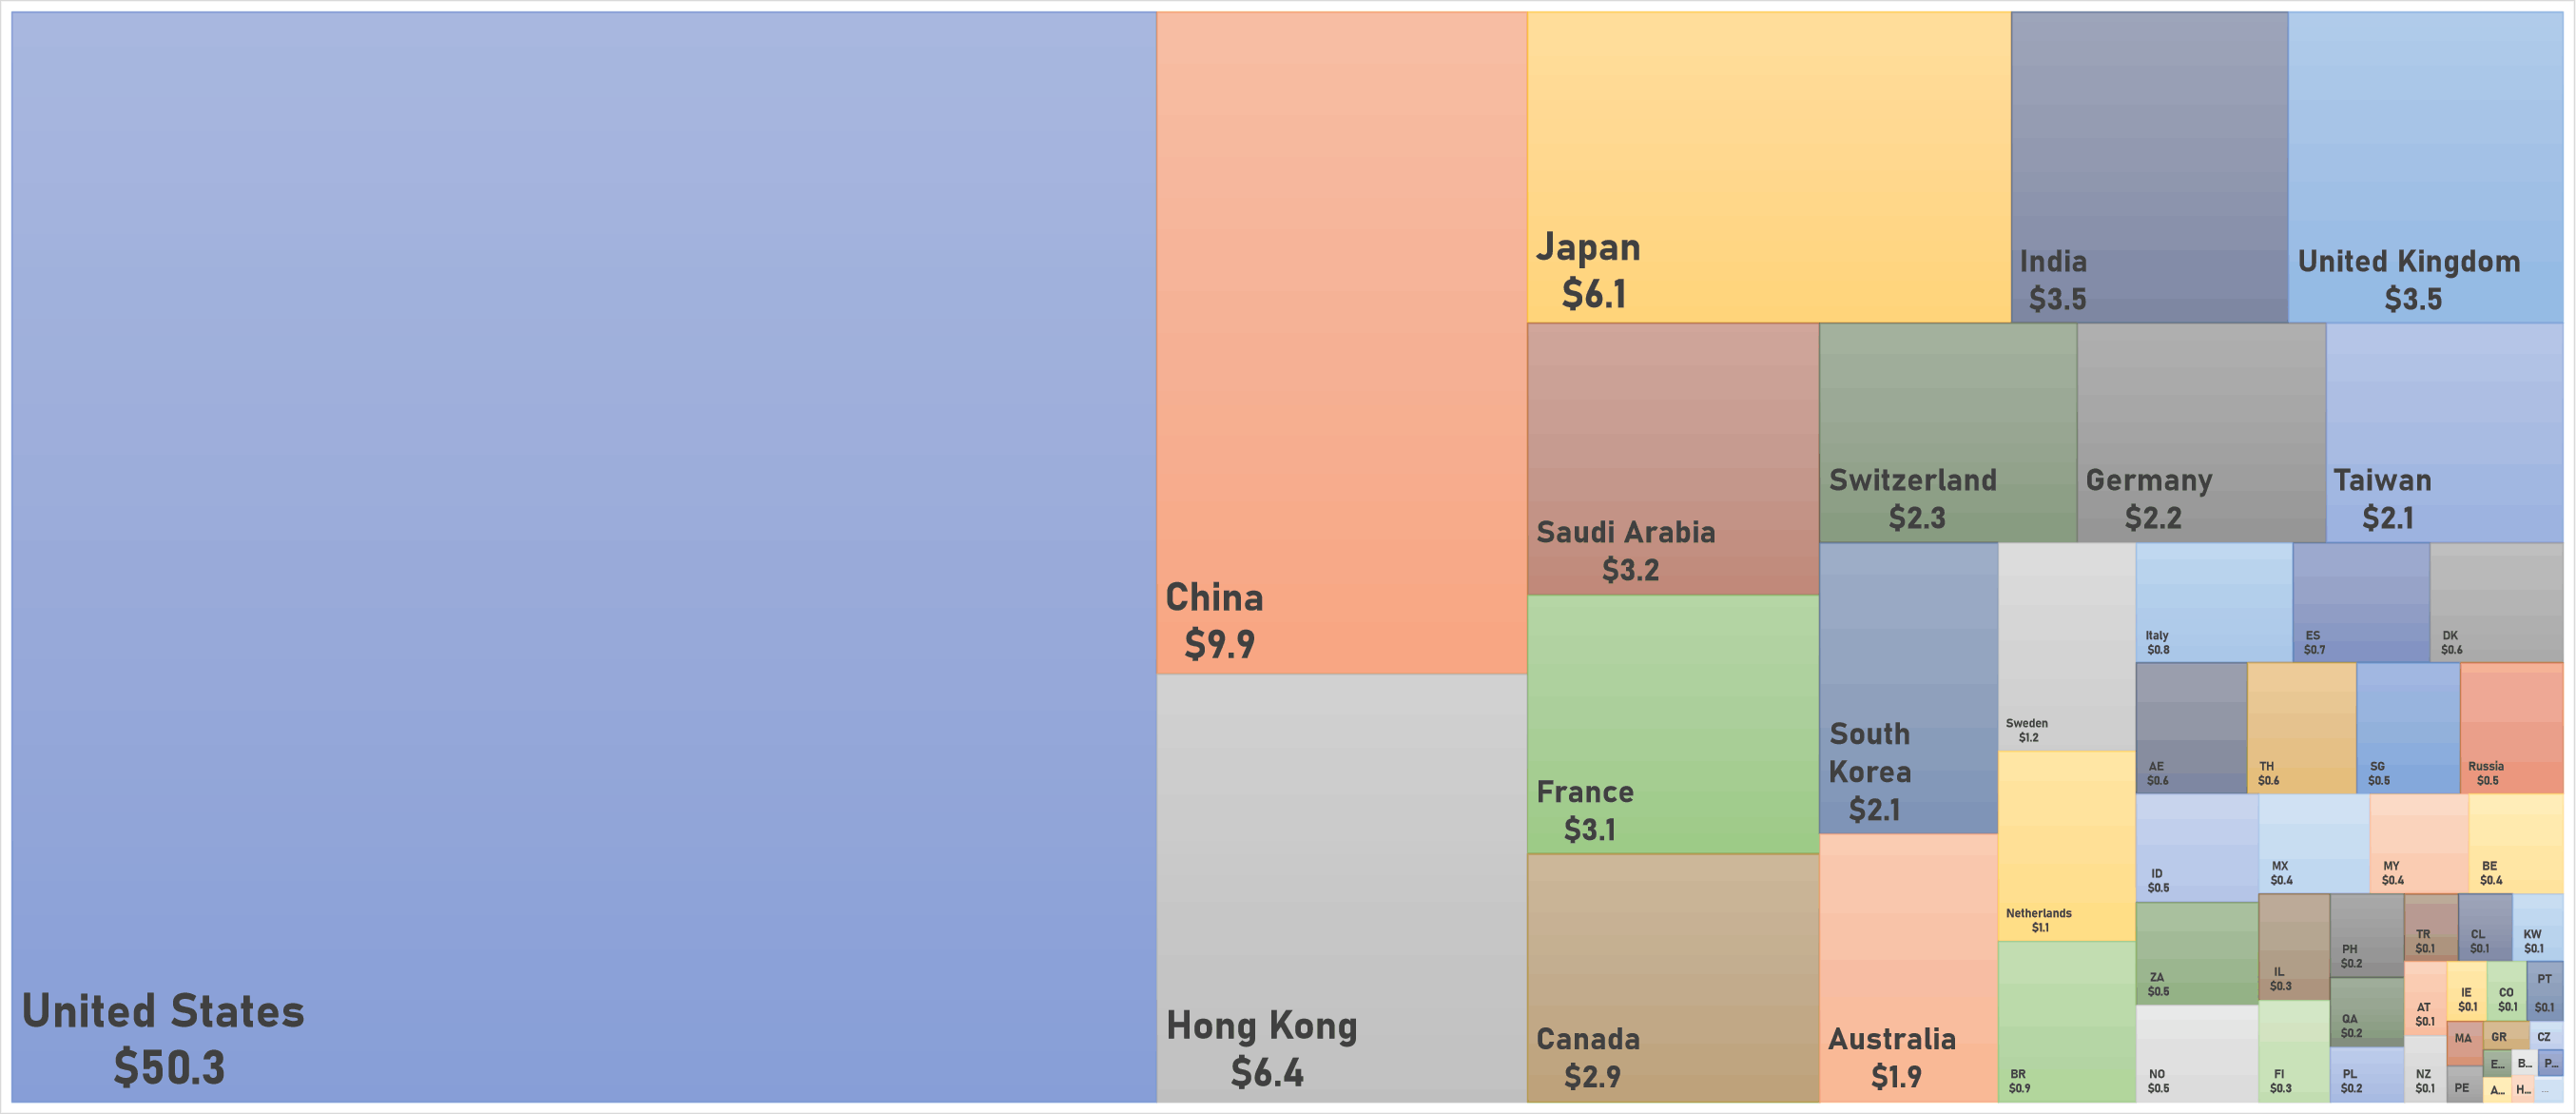 World Market Capitalization by country (in US$ Trillion) | Sources: phipost.com, FactSet data